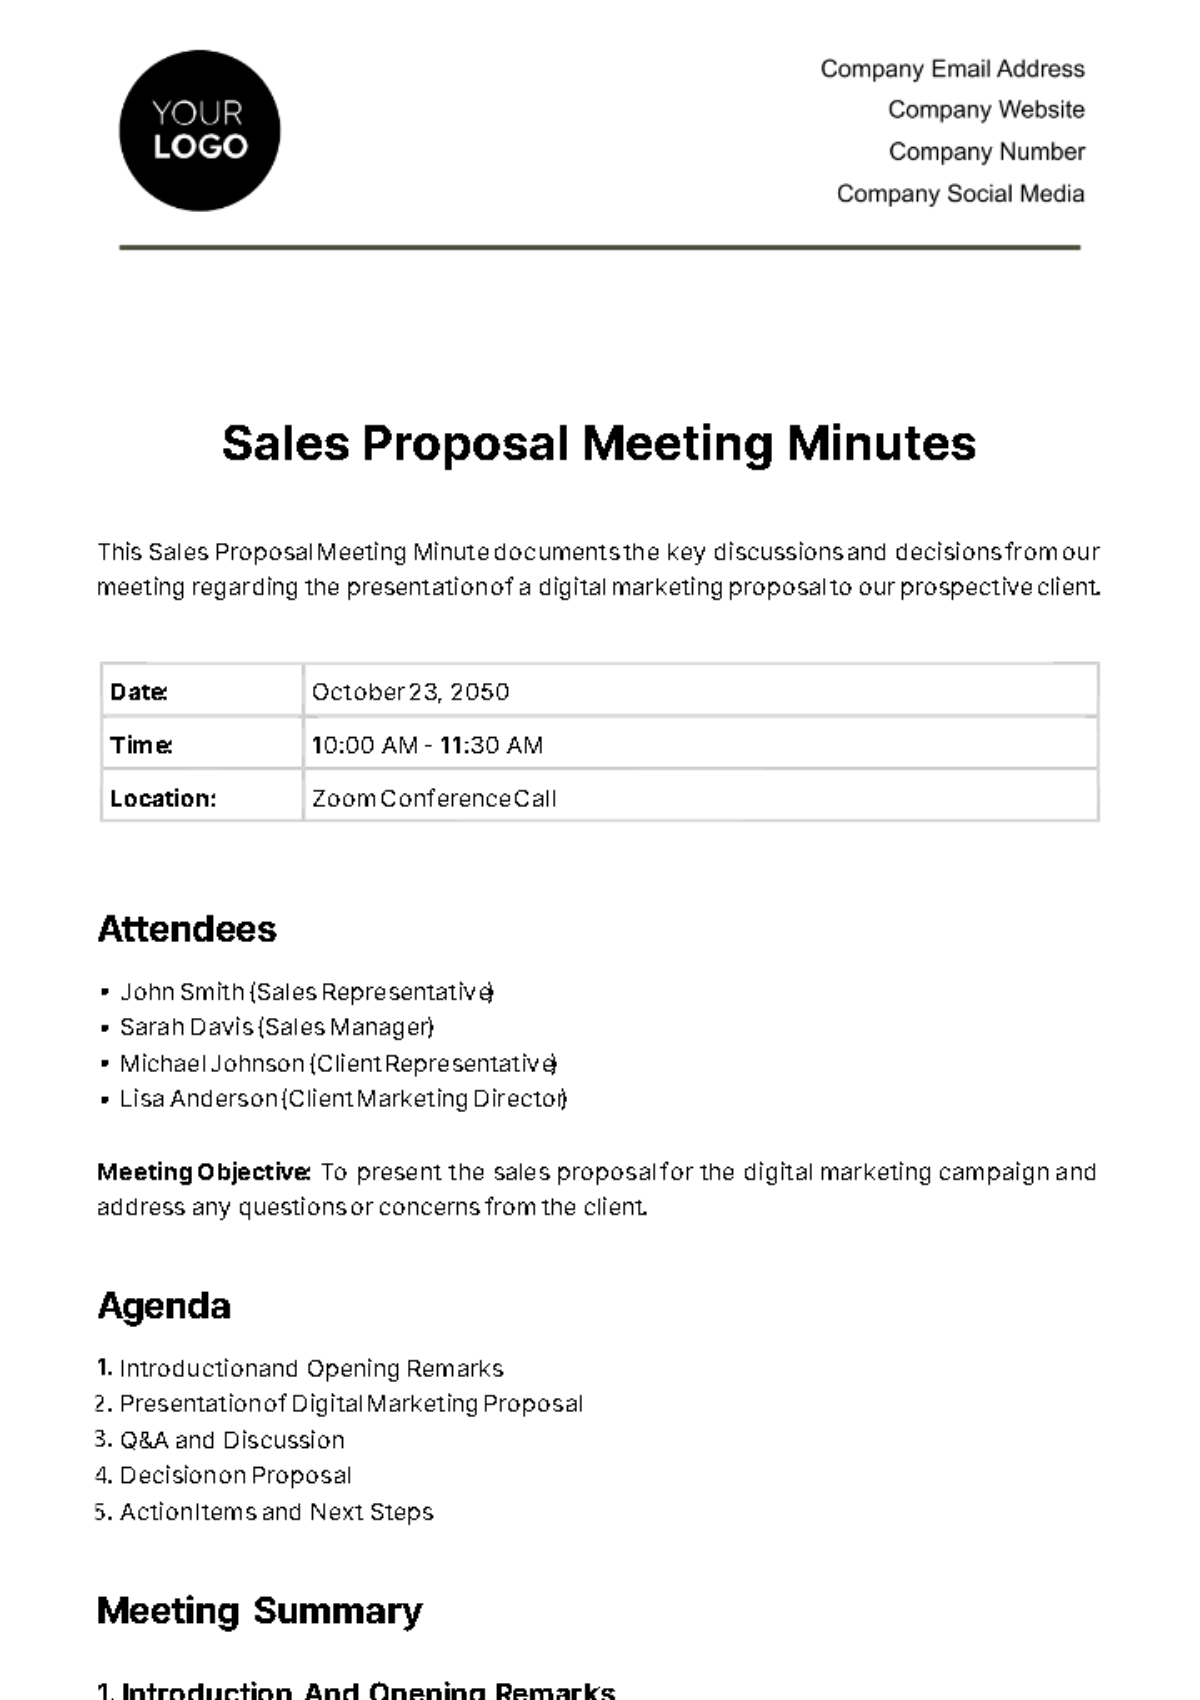 Free Sales Proposal Meeting Minute Template